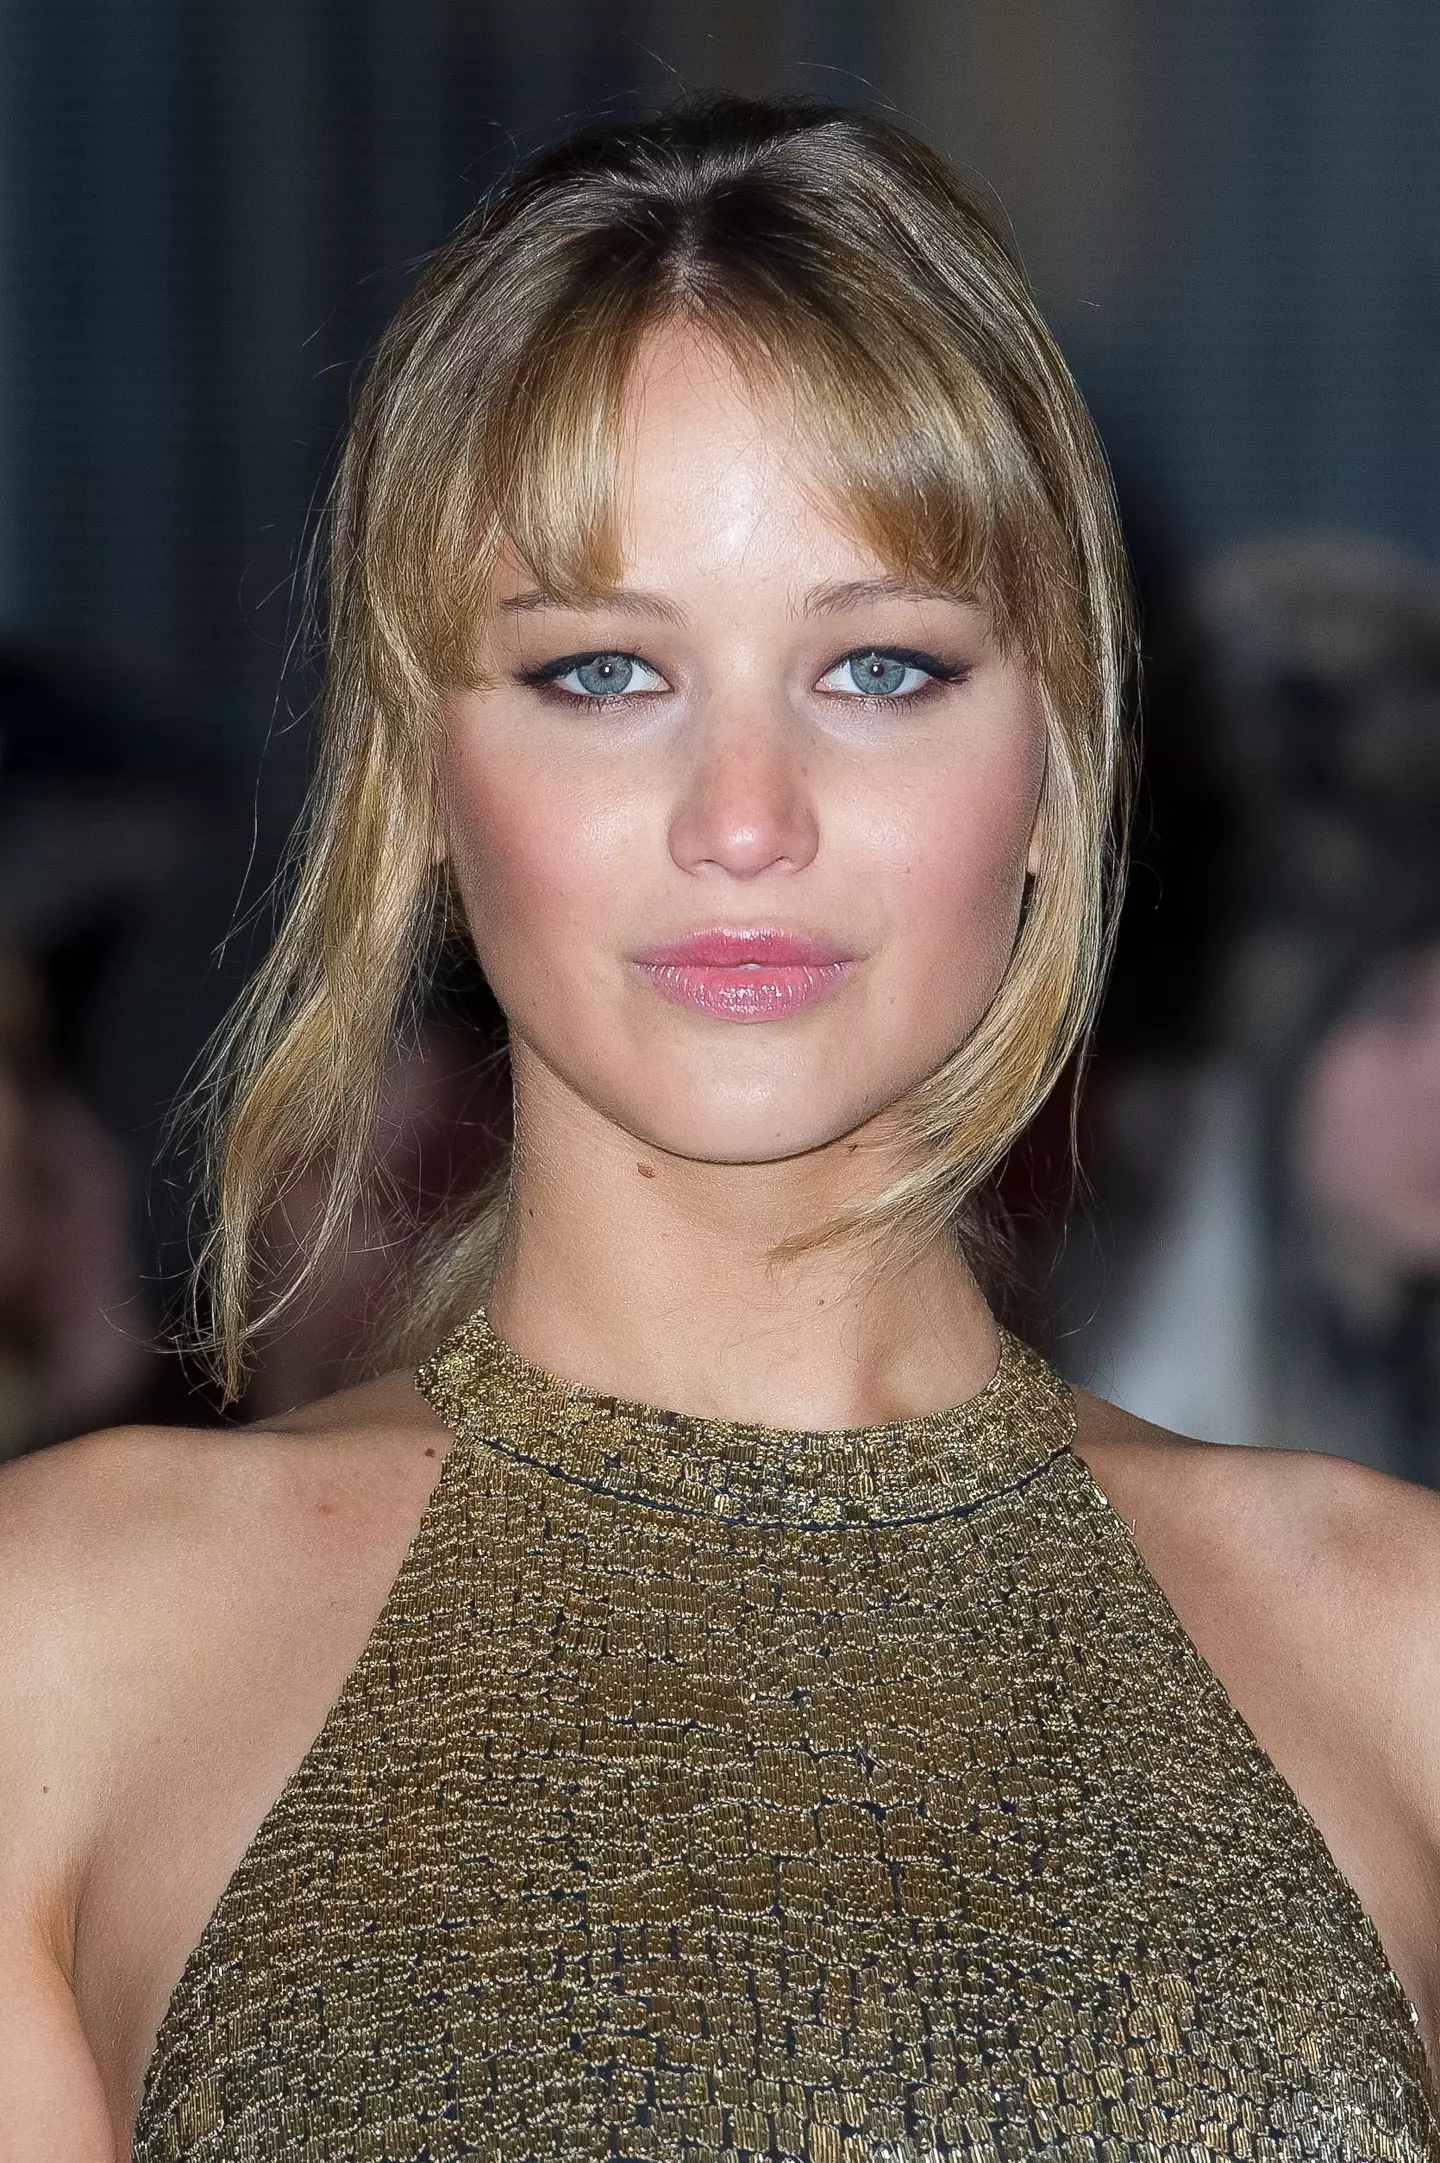 Jennifer Lawrence won the Best Actress award at the 85th Academy Awards.